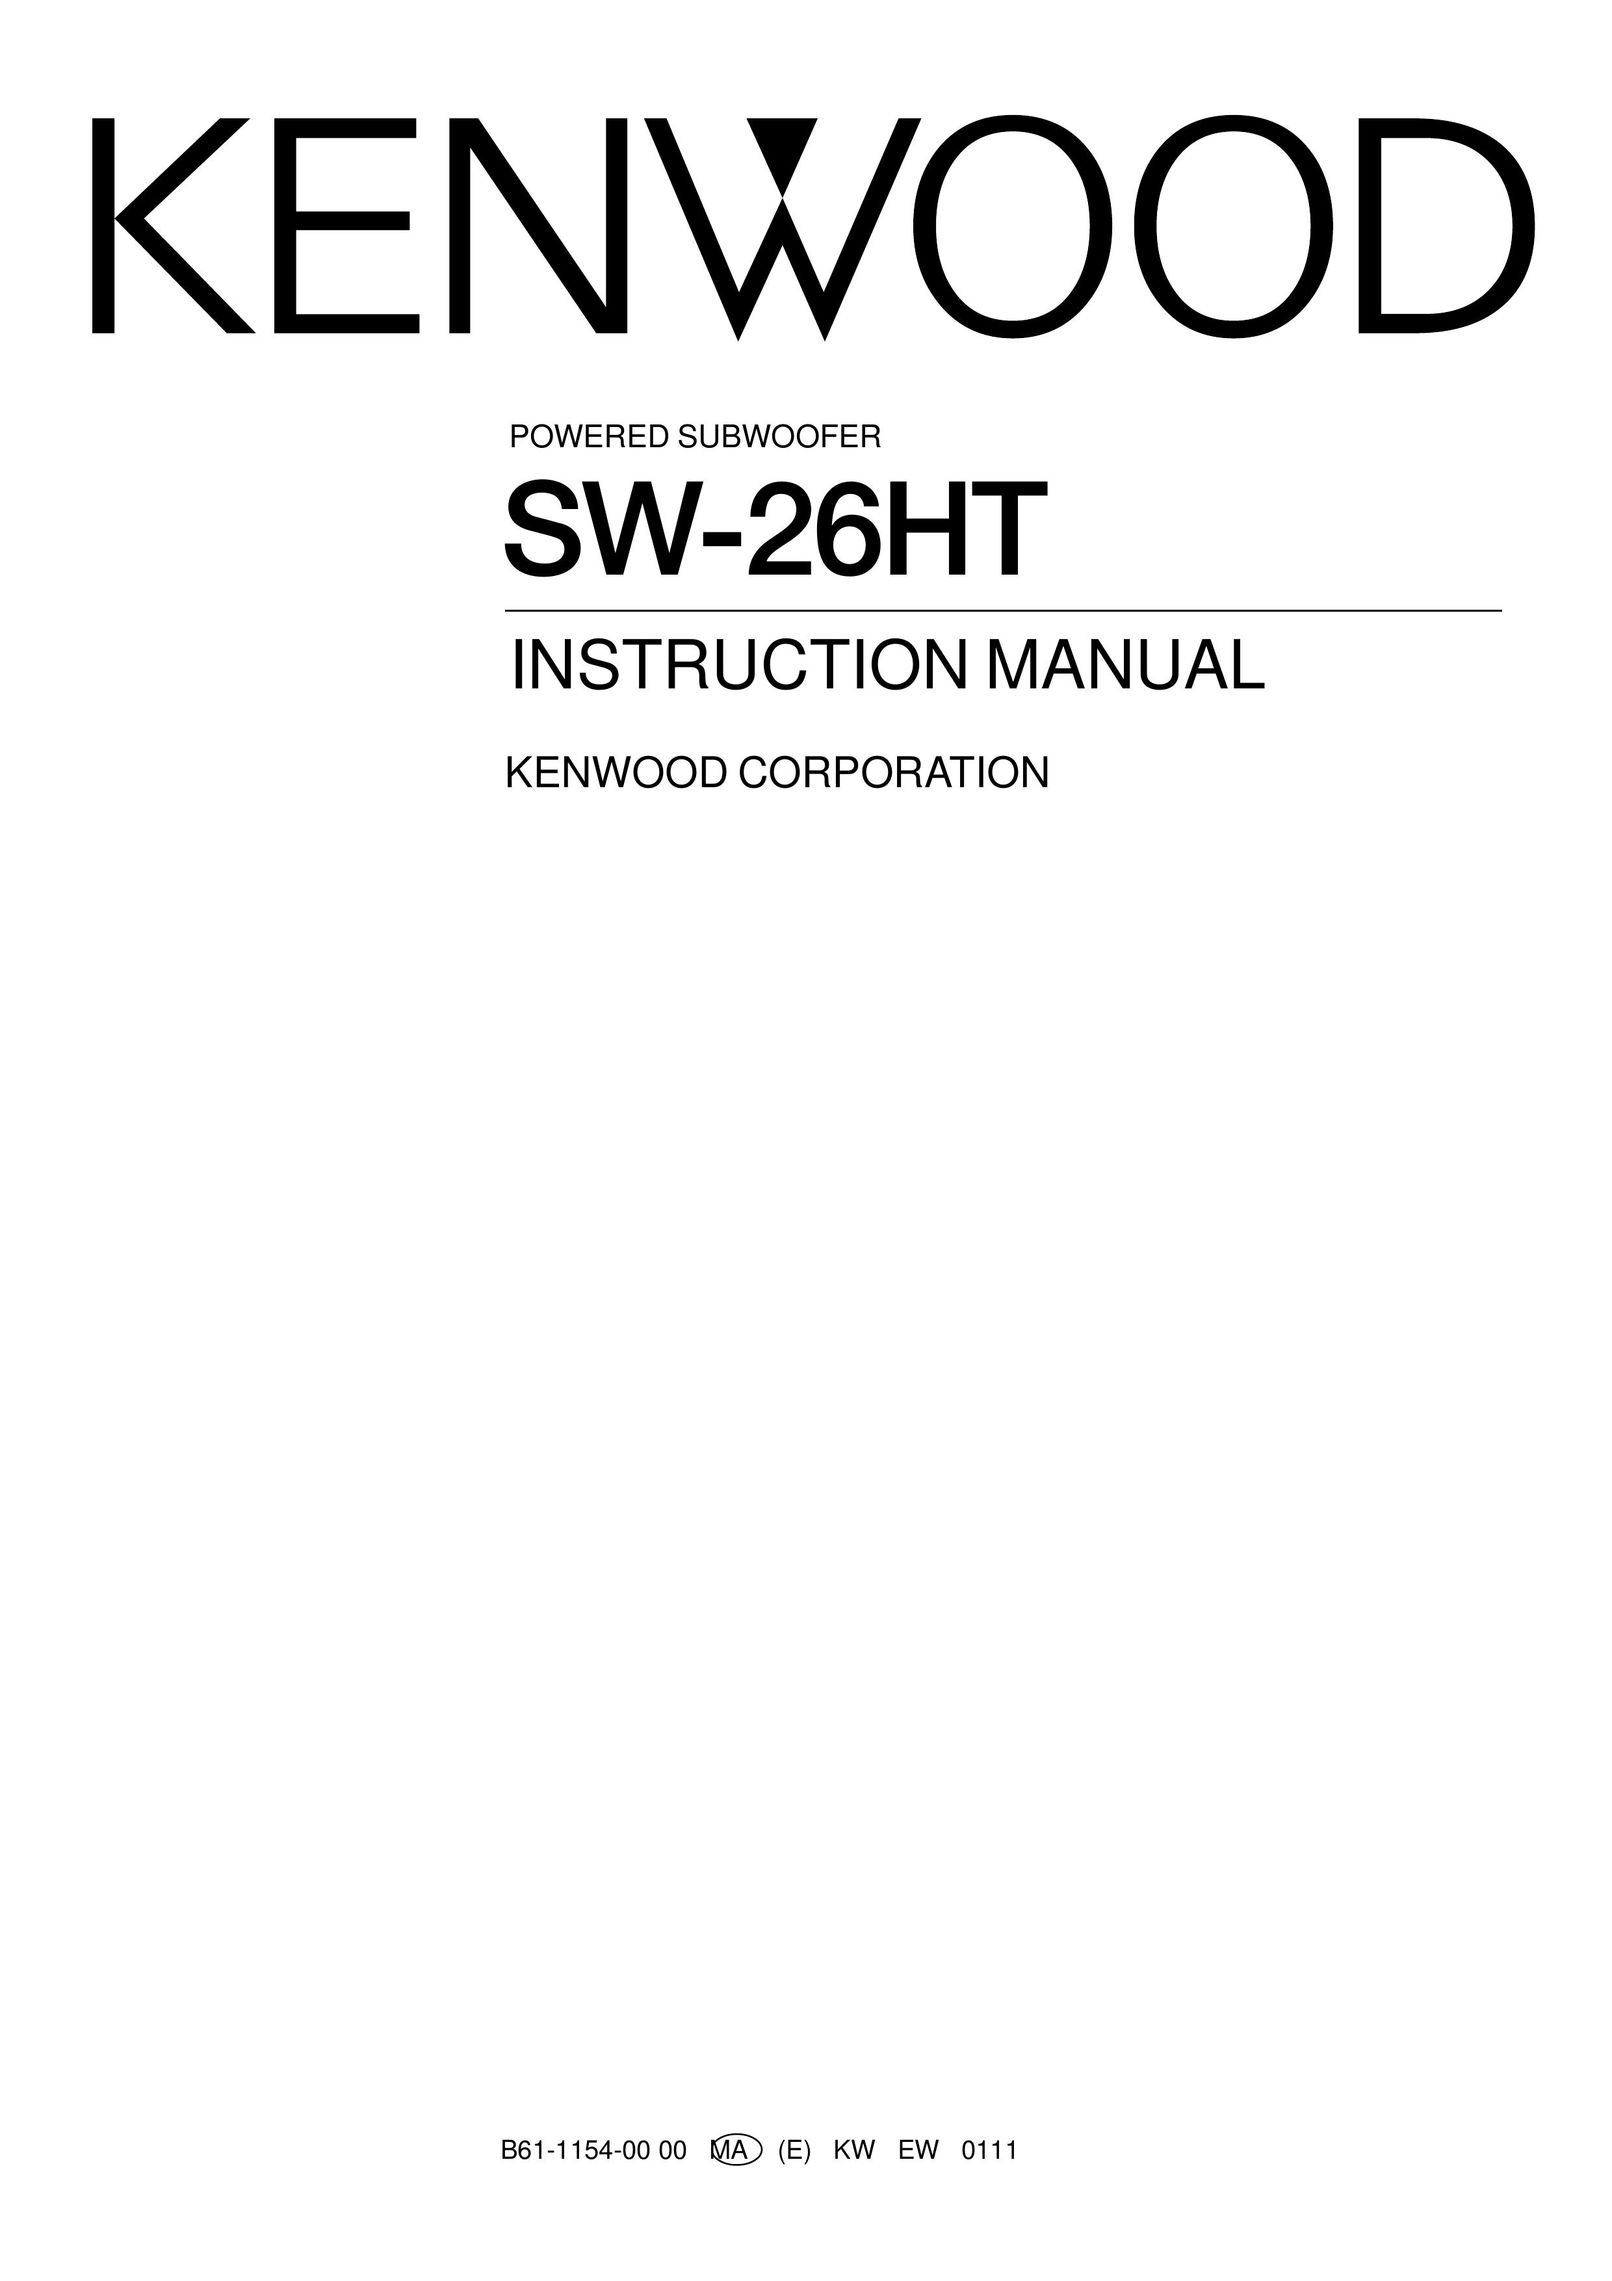 Kenwood SW-26HT Home Theater System User Manual